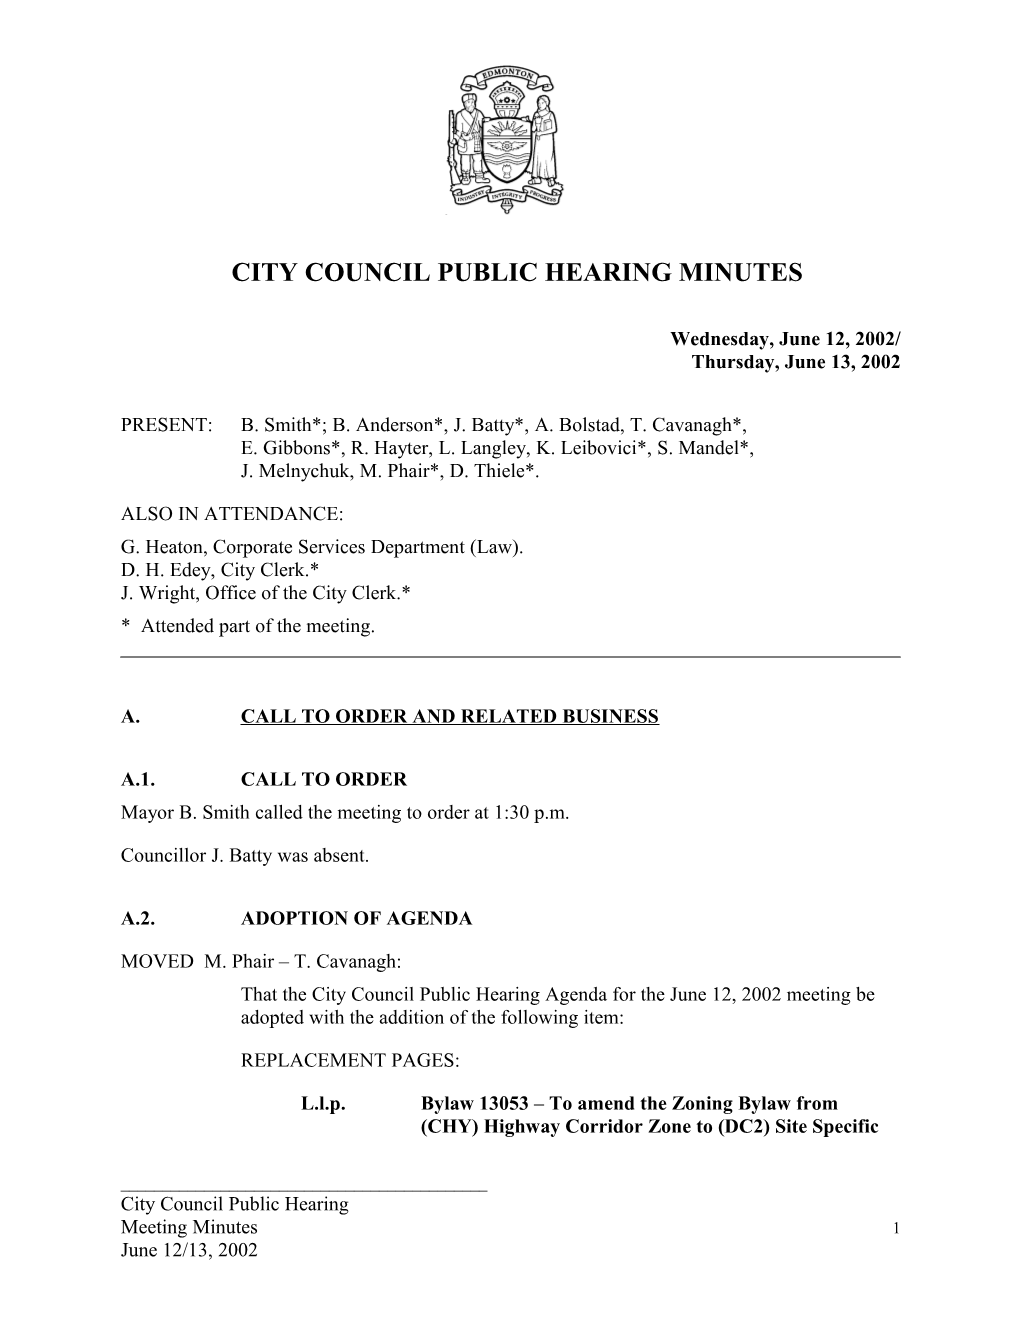 Minutes for City Council June 12, 2002 Meeting